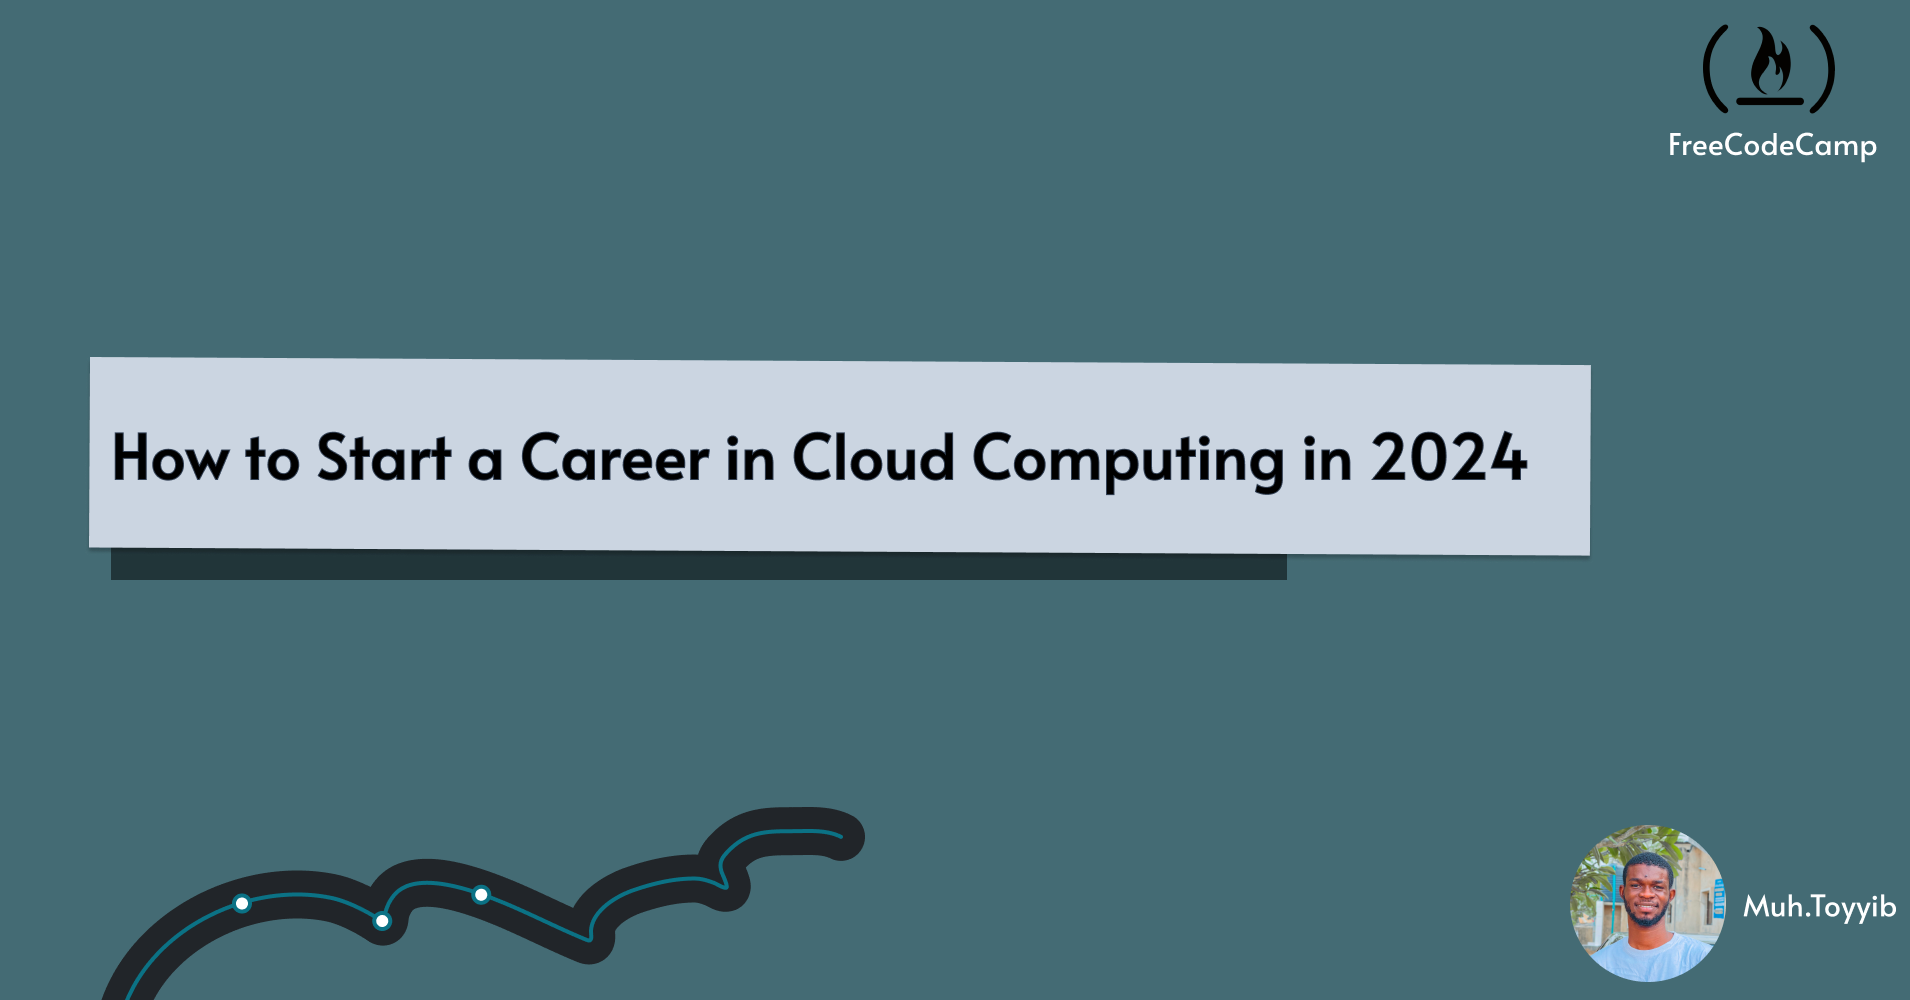 How to Start a Career in Cloud Computing in 2024